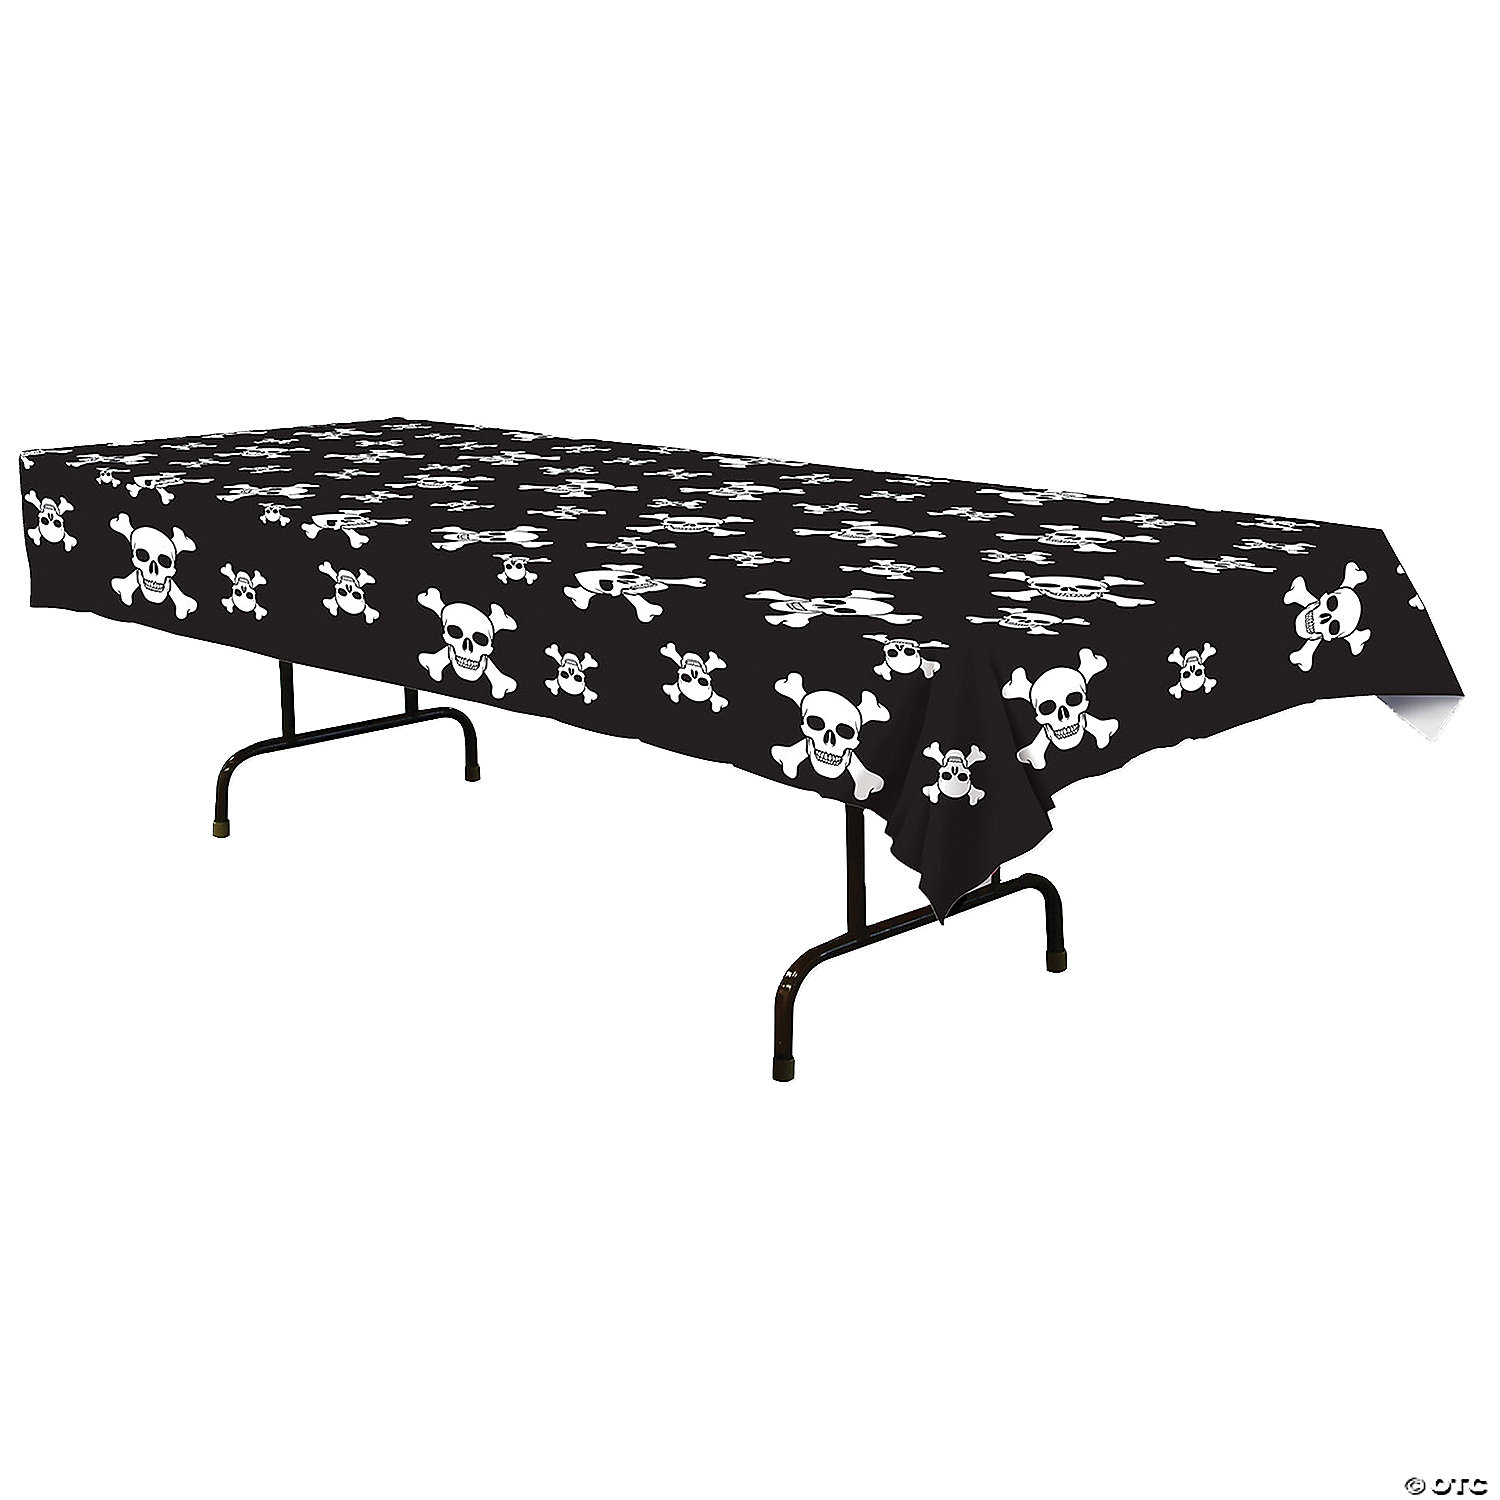 PIRATE TABLE COVER - HALLOWEEN